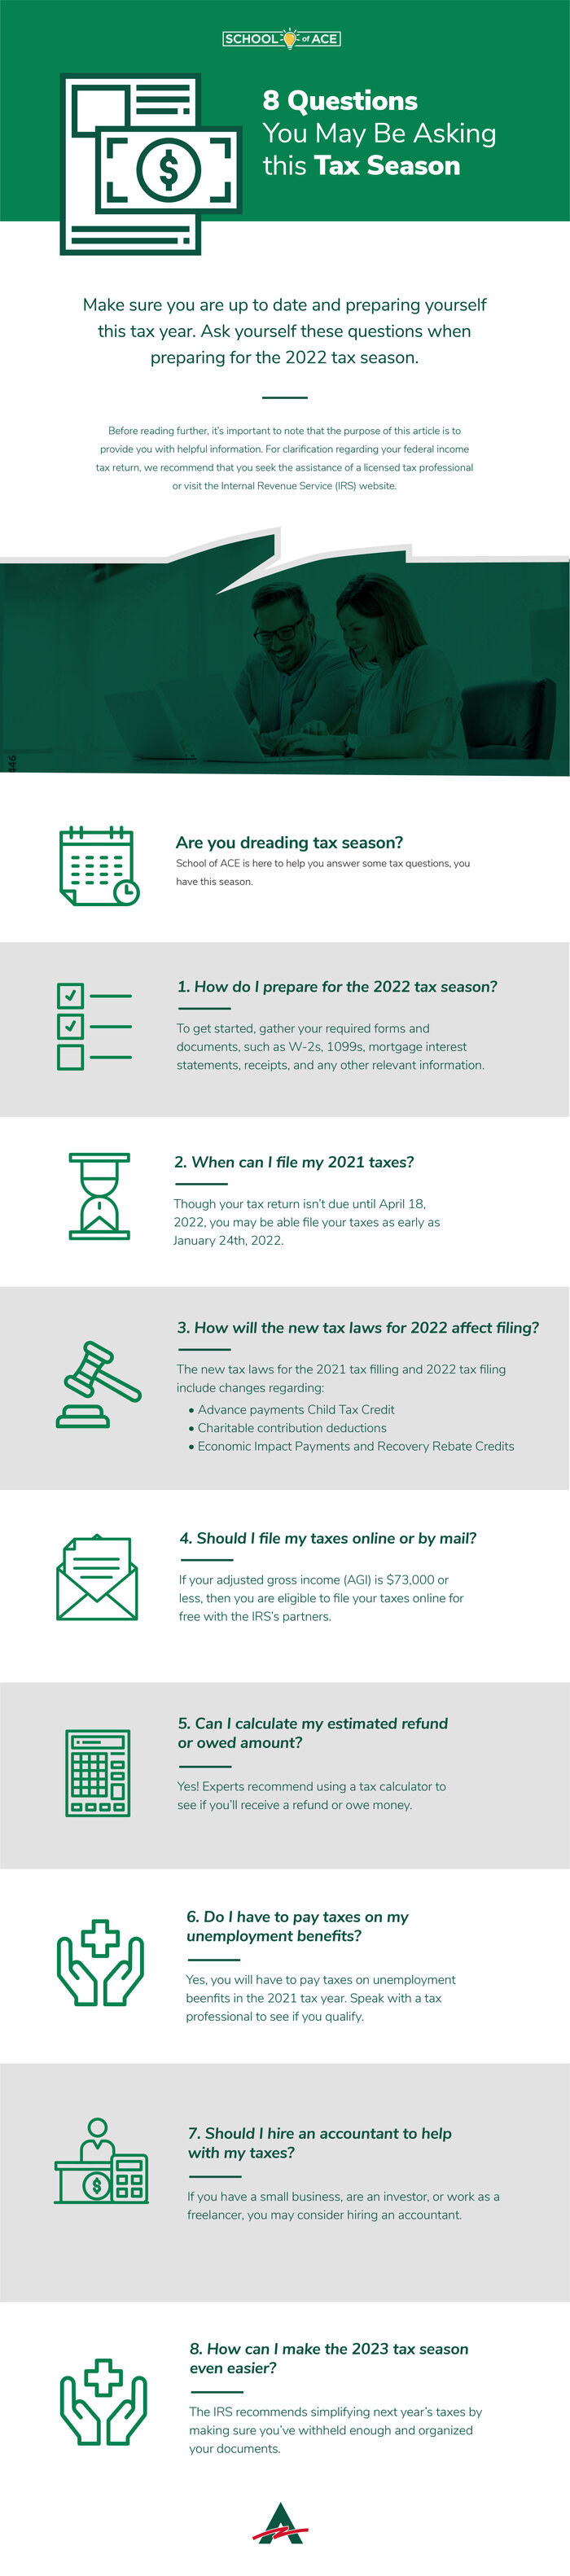 8 Question you may ask this tax season infographic